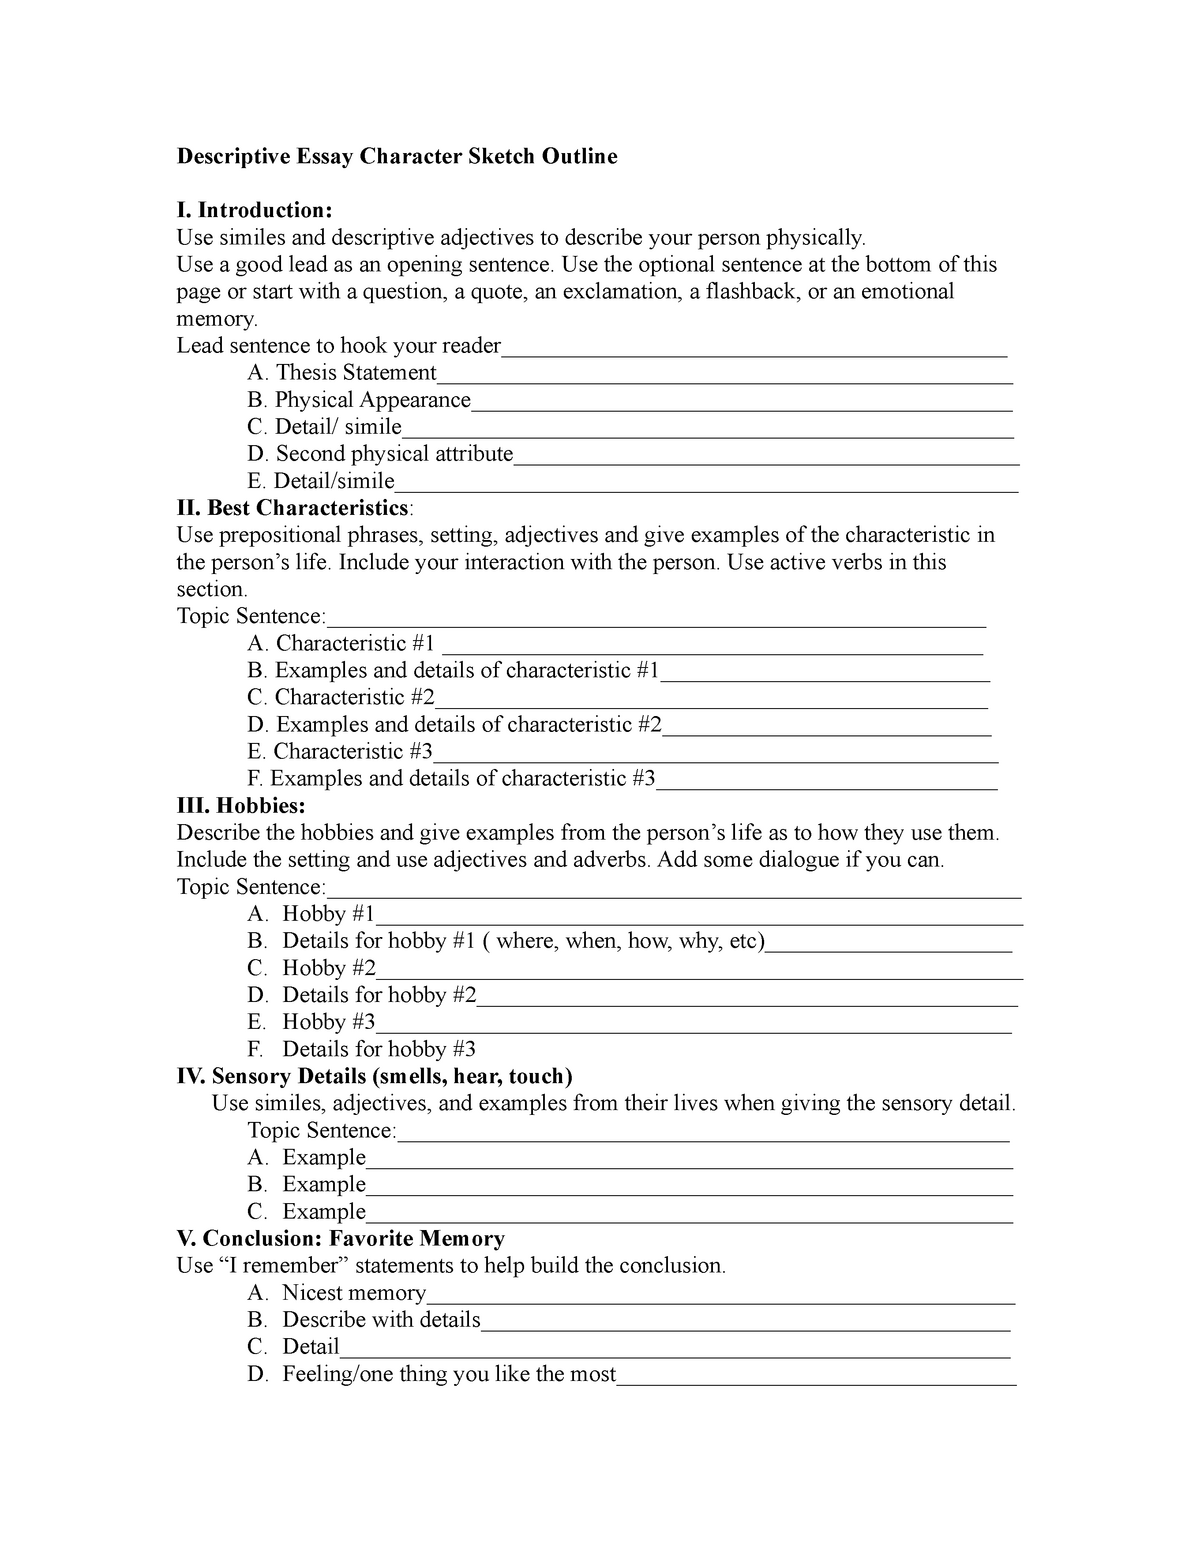 Short Story Analysis Essay - 3+ Examples, Format, Pdf | Examples